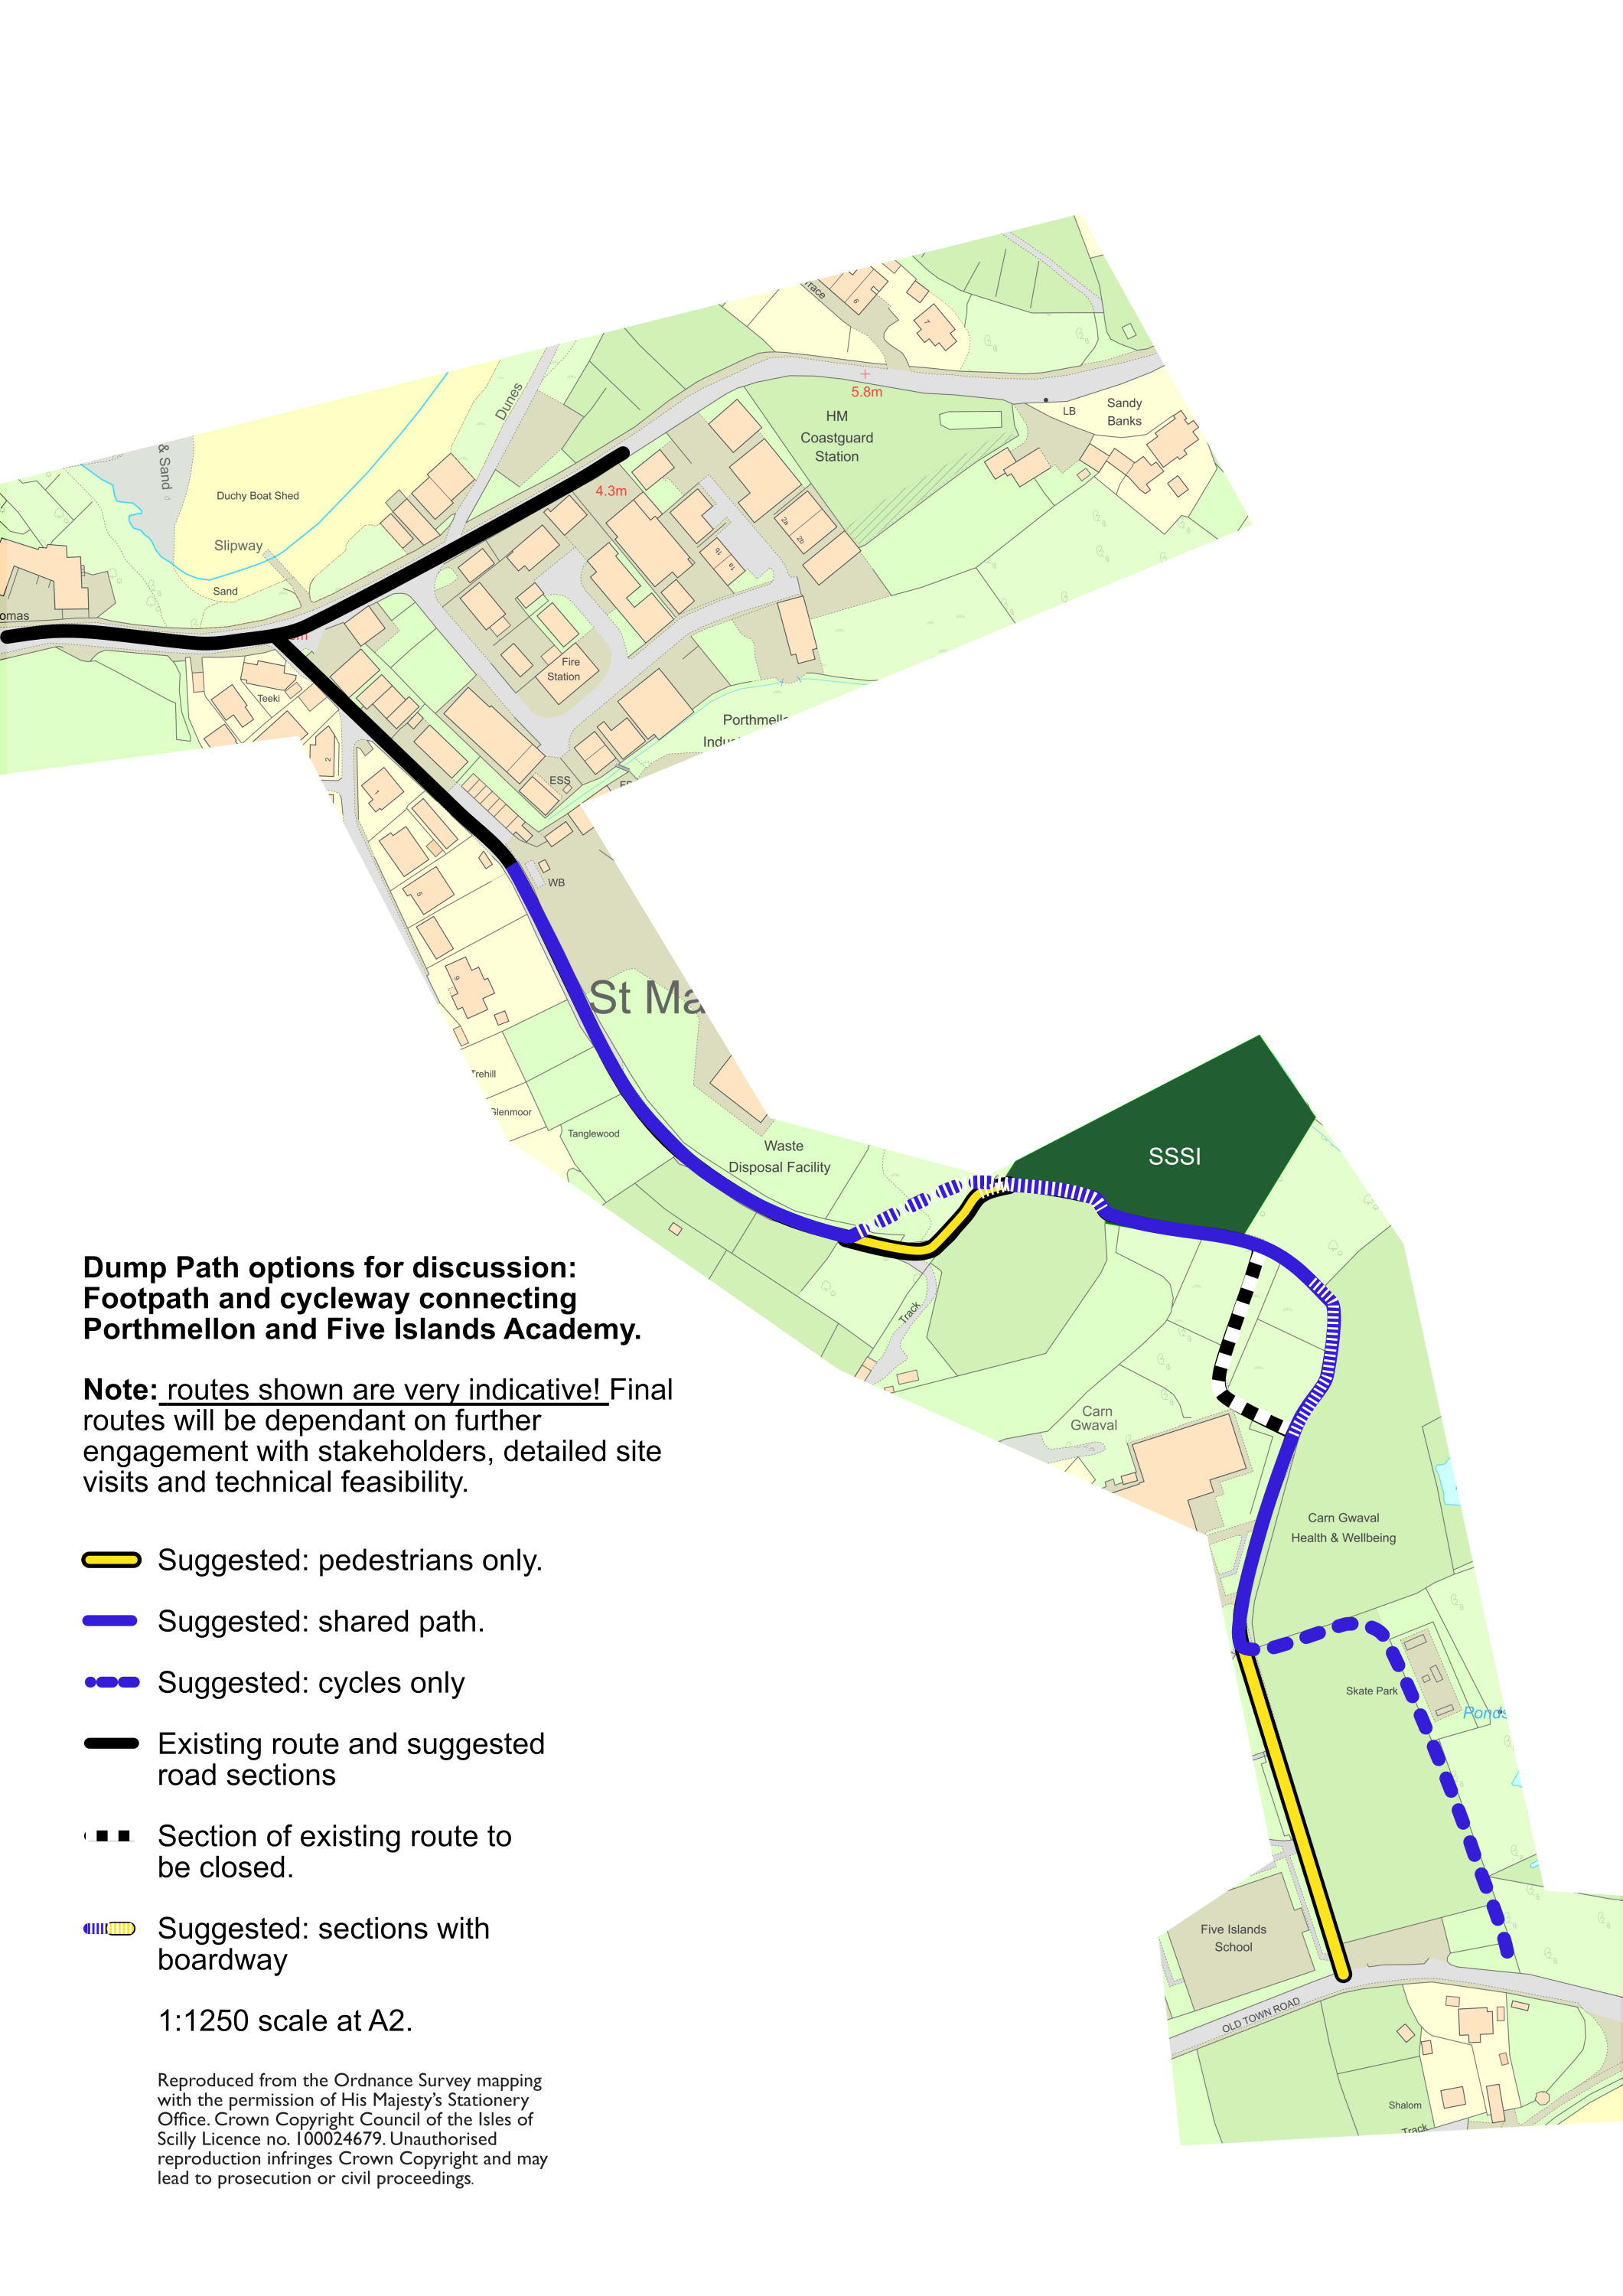 Map showing proposed changes to the Dump Path route on St Mary's including some separation of routes for cyclist and pedestrians. For a full explanation of the proposed changes, please email environment@scilly.gov.uk